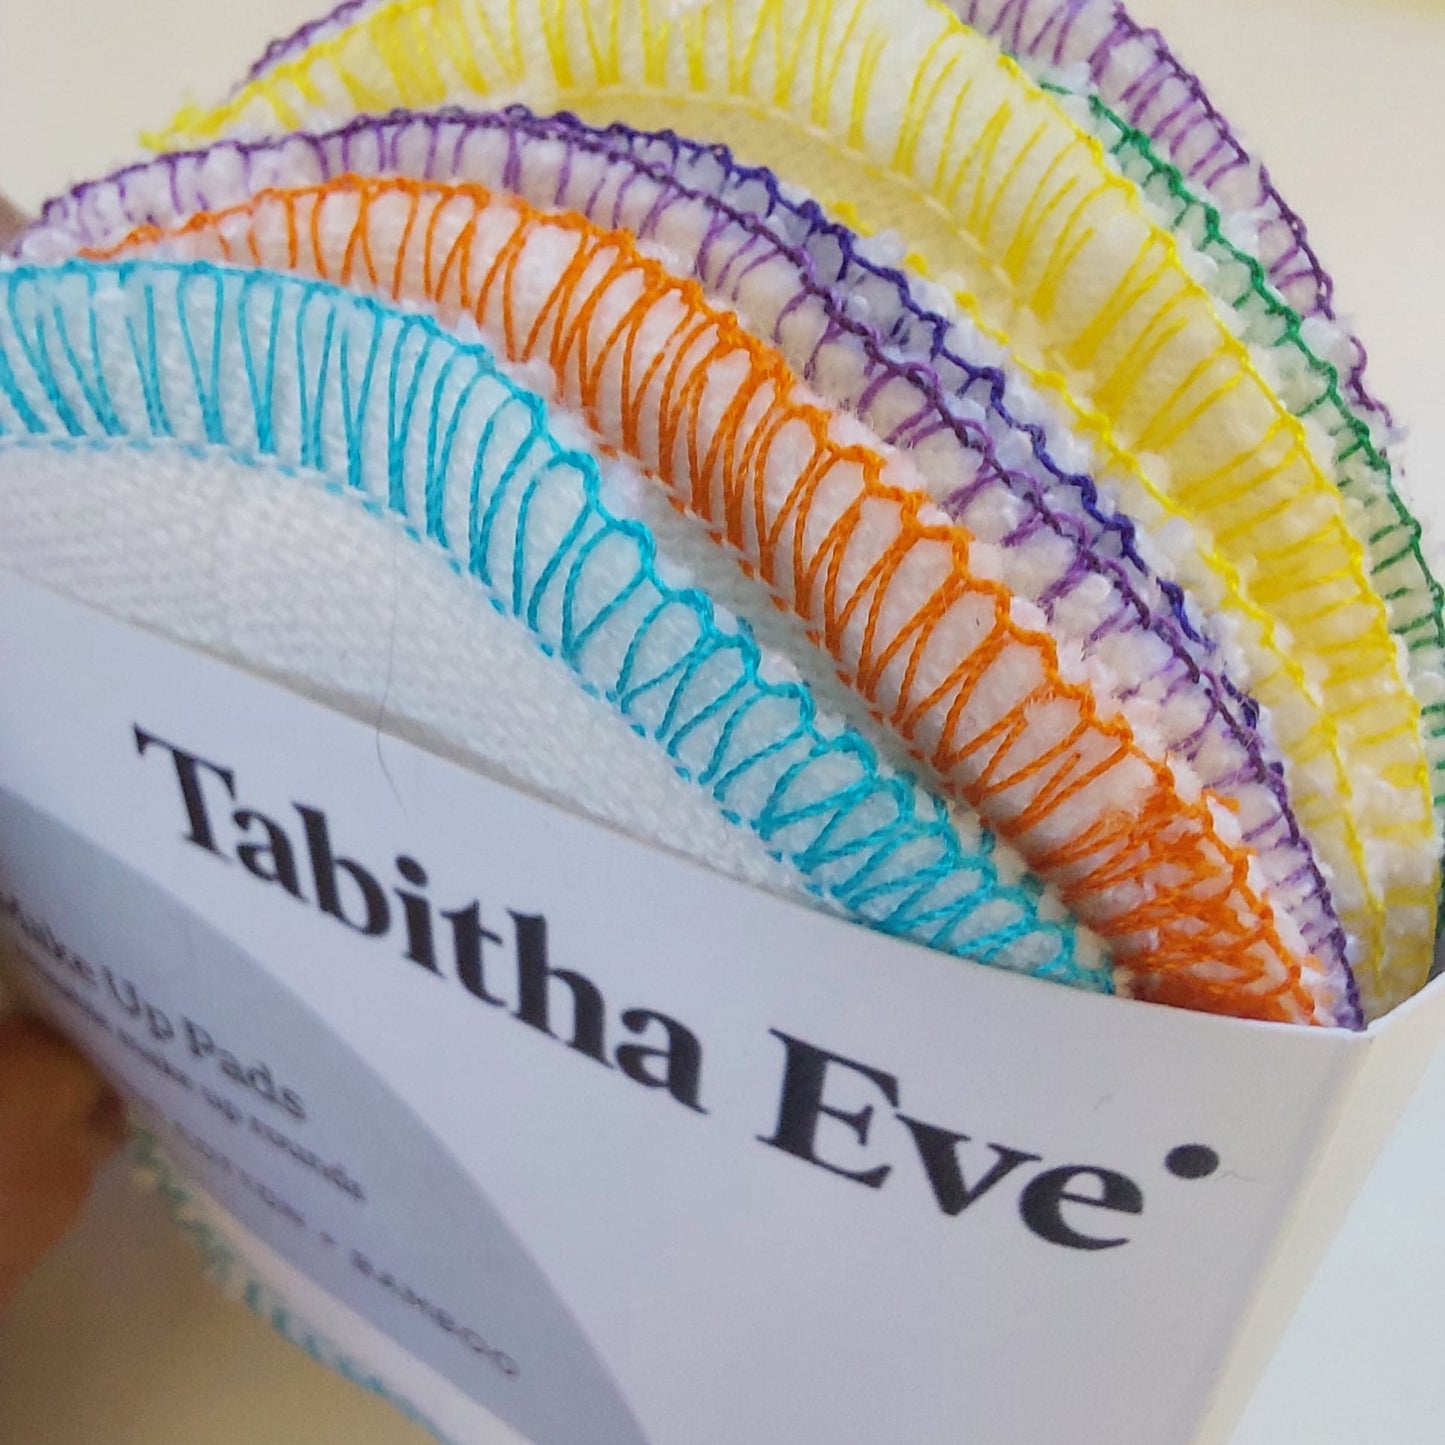 Tabitha Eve Makeup Removers Rainbow Facial Rounds - Pack of 10